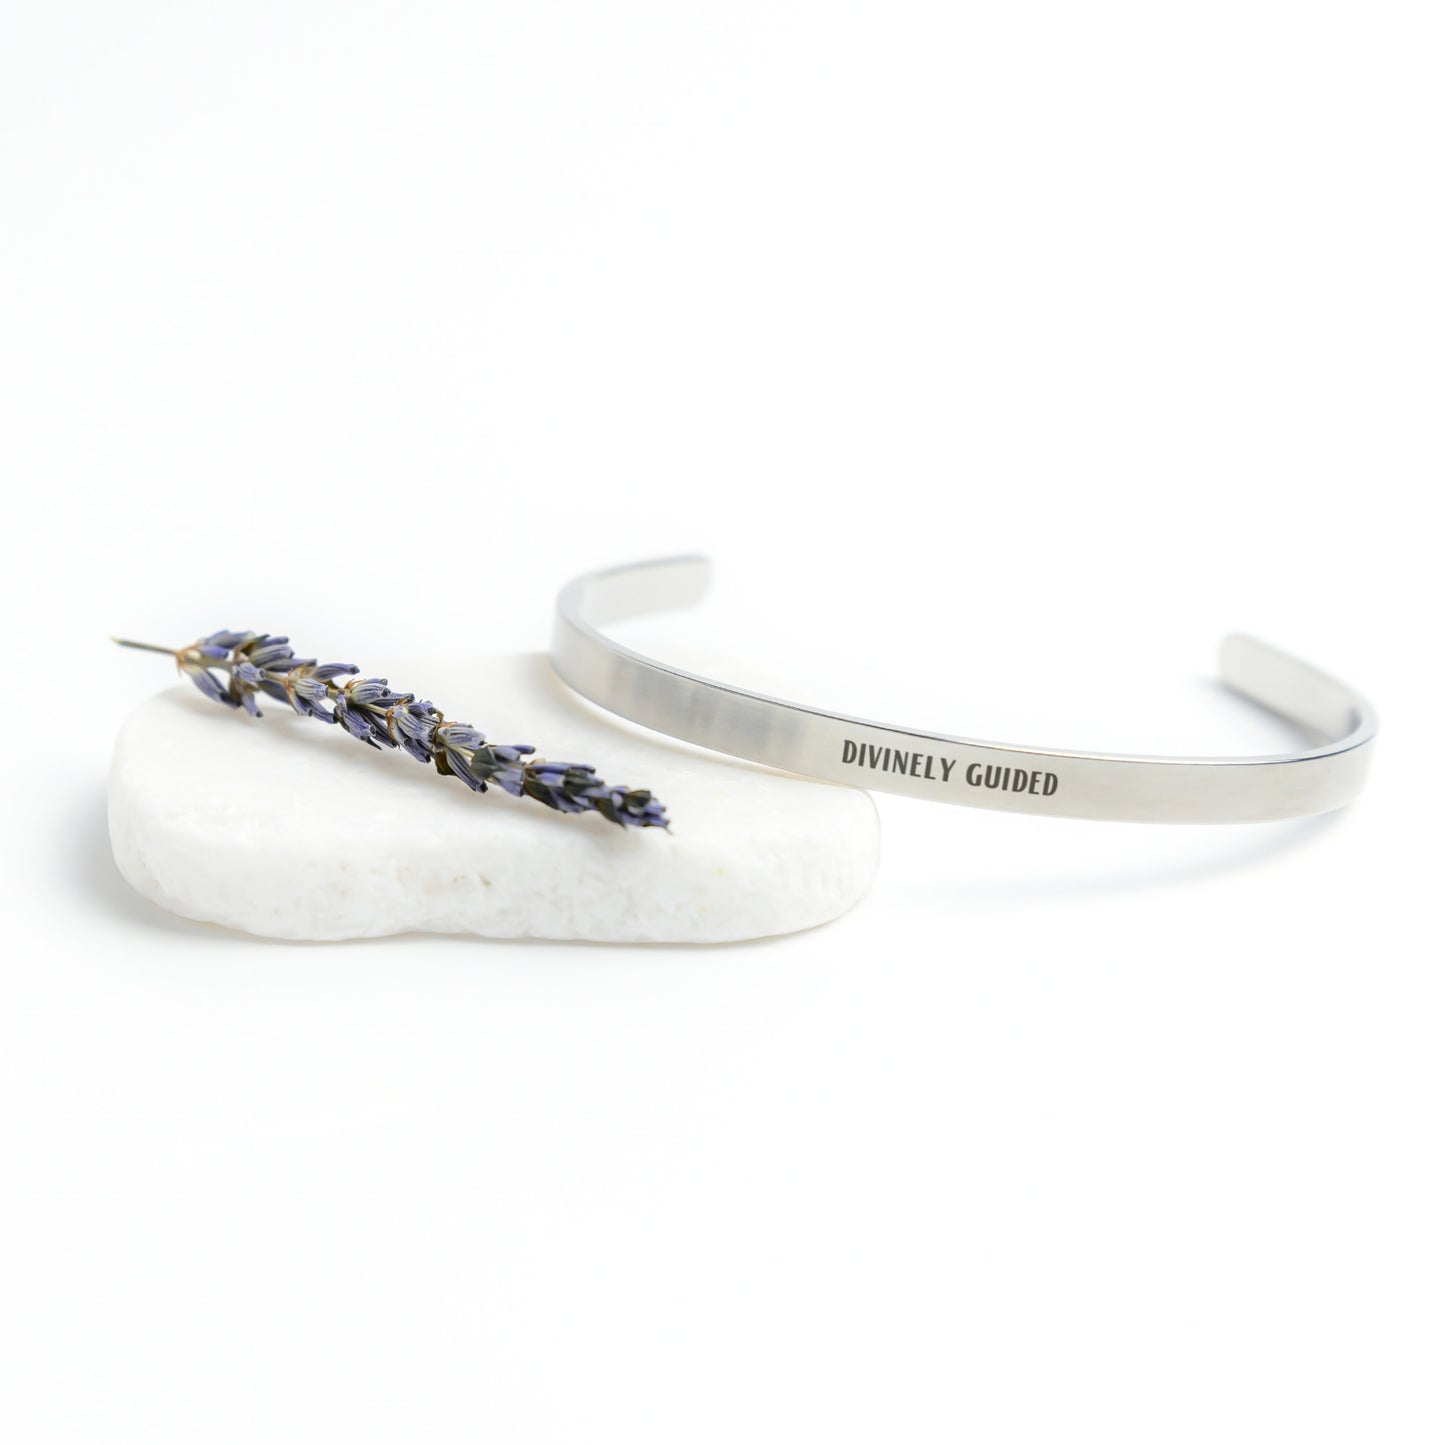 Divinely Guided Cuff Bracelet